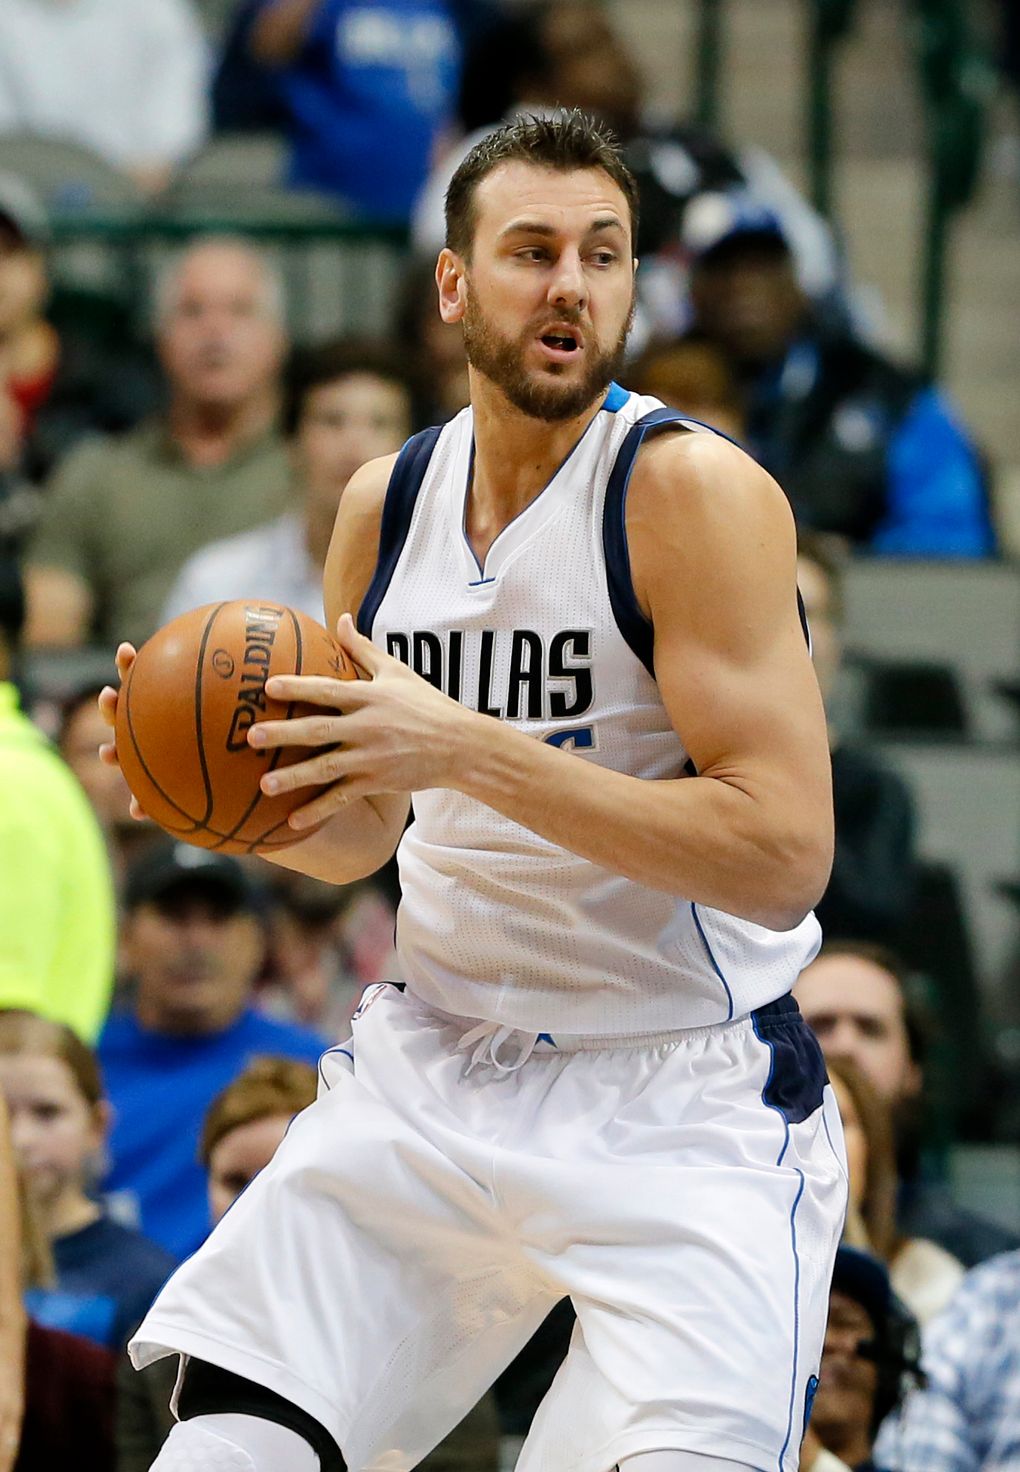 Center of attention: Cavaliers sign center Andrew Bogut